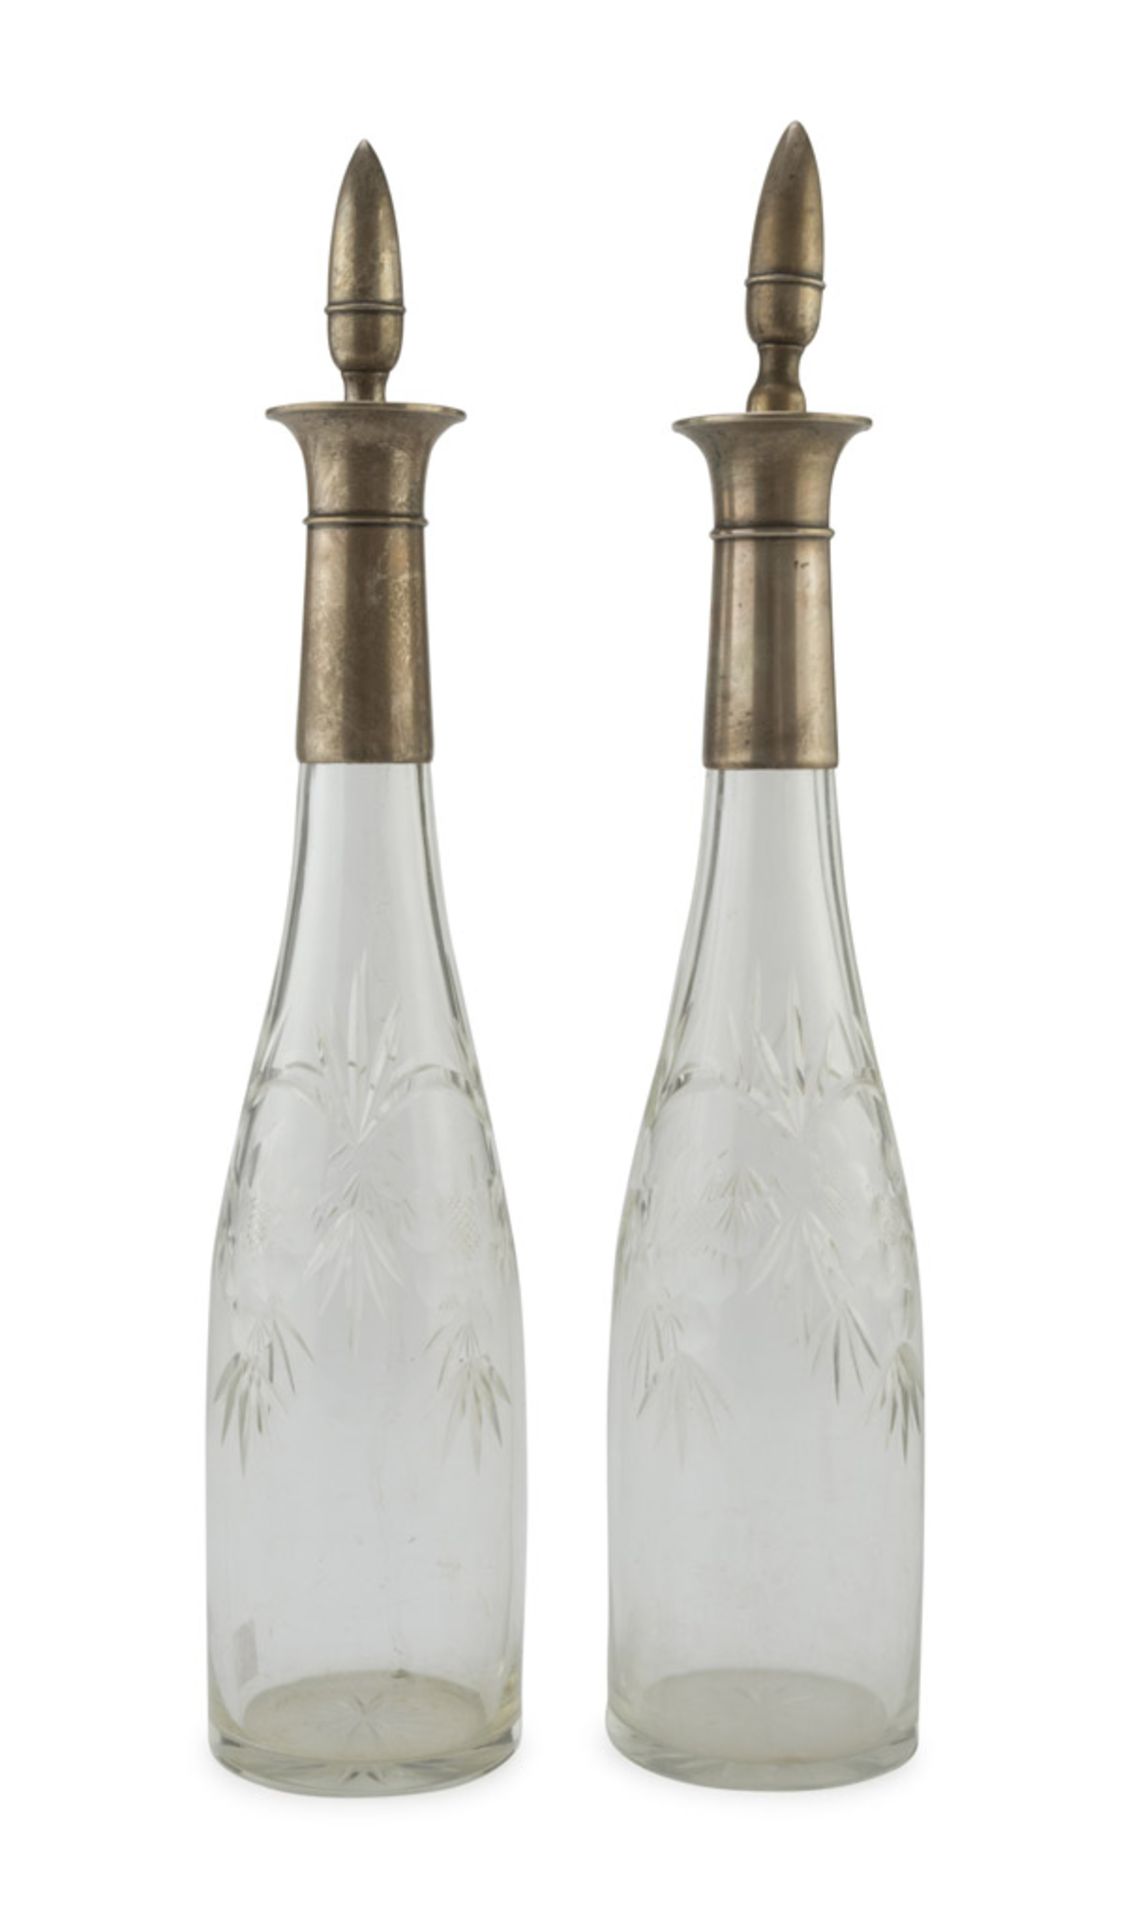 A PAIR OF GLASS BOTTLES, EARLY 20TH CENTURY silver-plated necks and caps engraved with floral